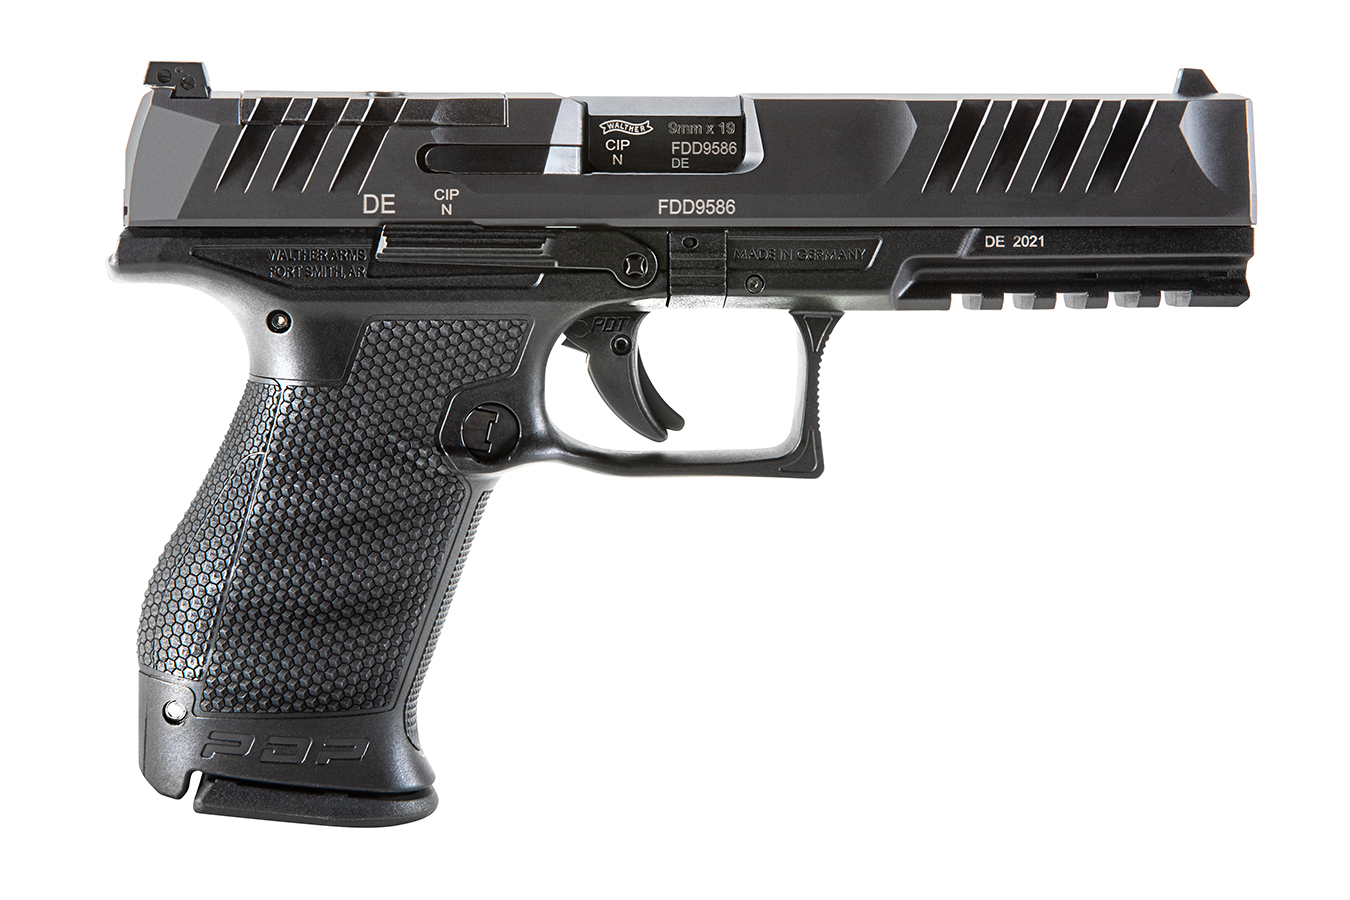 PDP COMPACT 9MM OPTIC READY STRIKER-FIRED PISTOL WITH 5 INCH BARREL